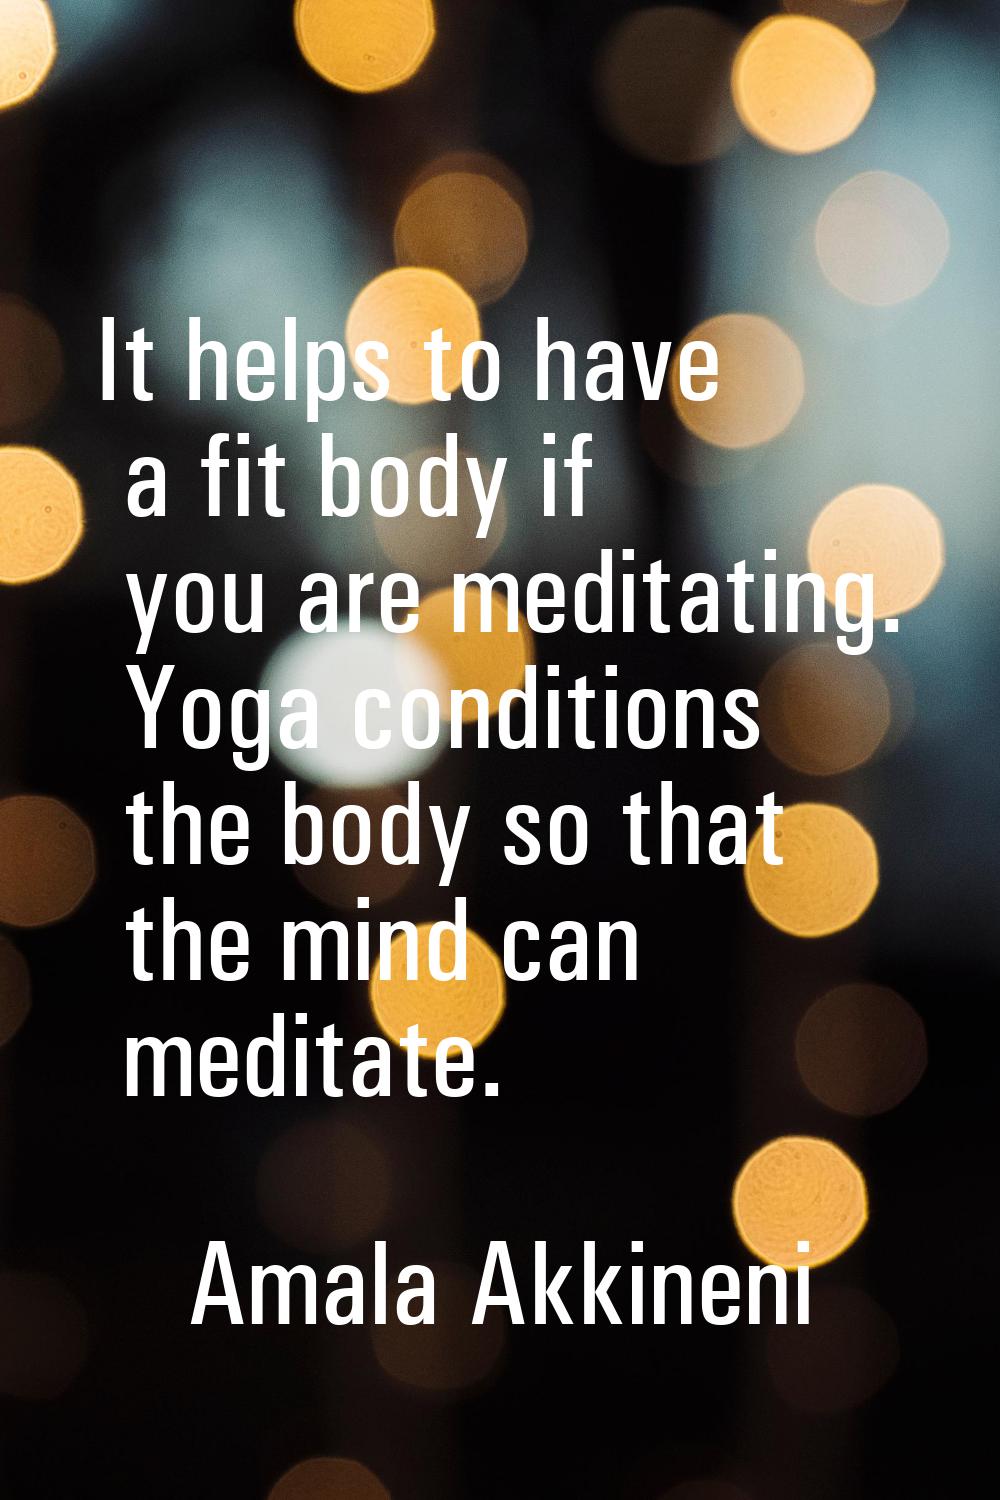 It helps to have a fit body if you are meditating. Yoga conditions the body so that the mind can me